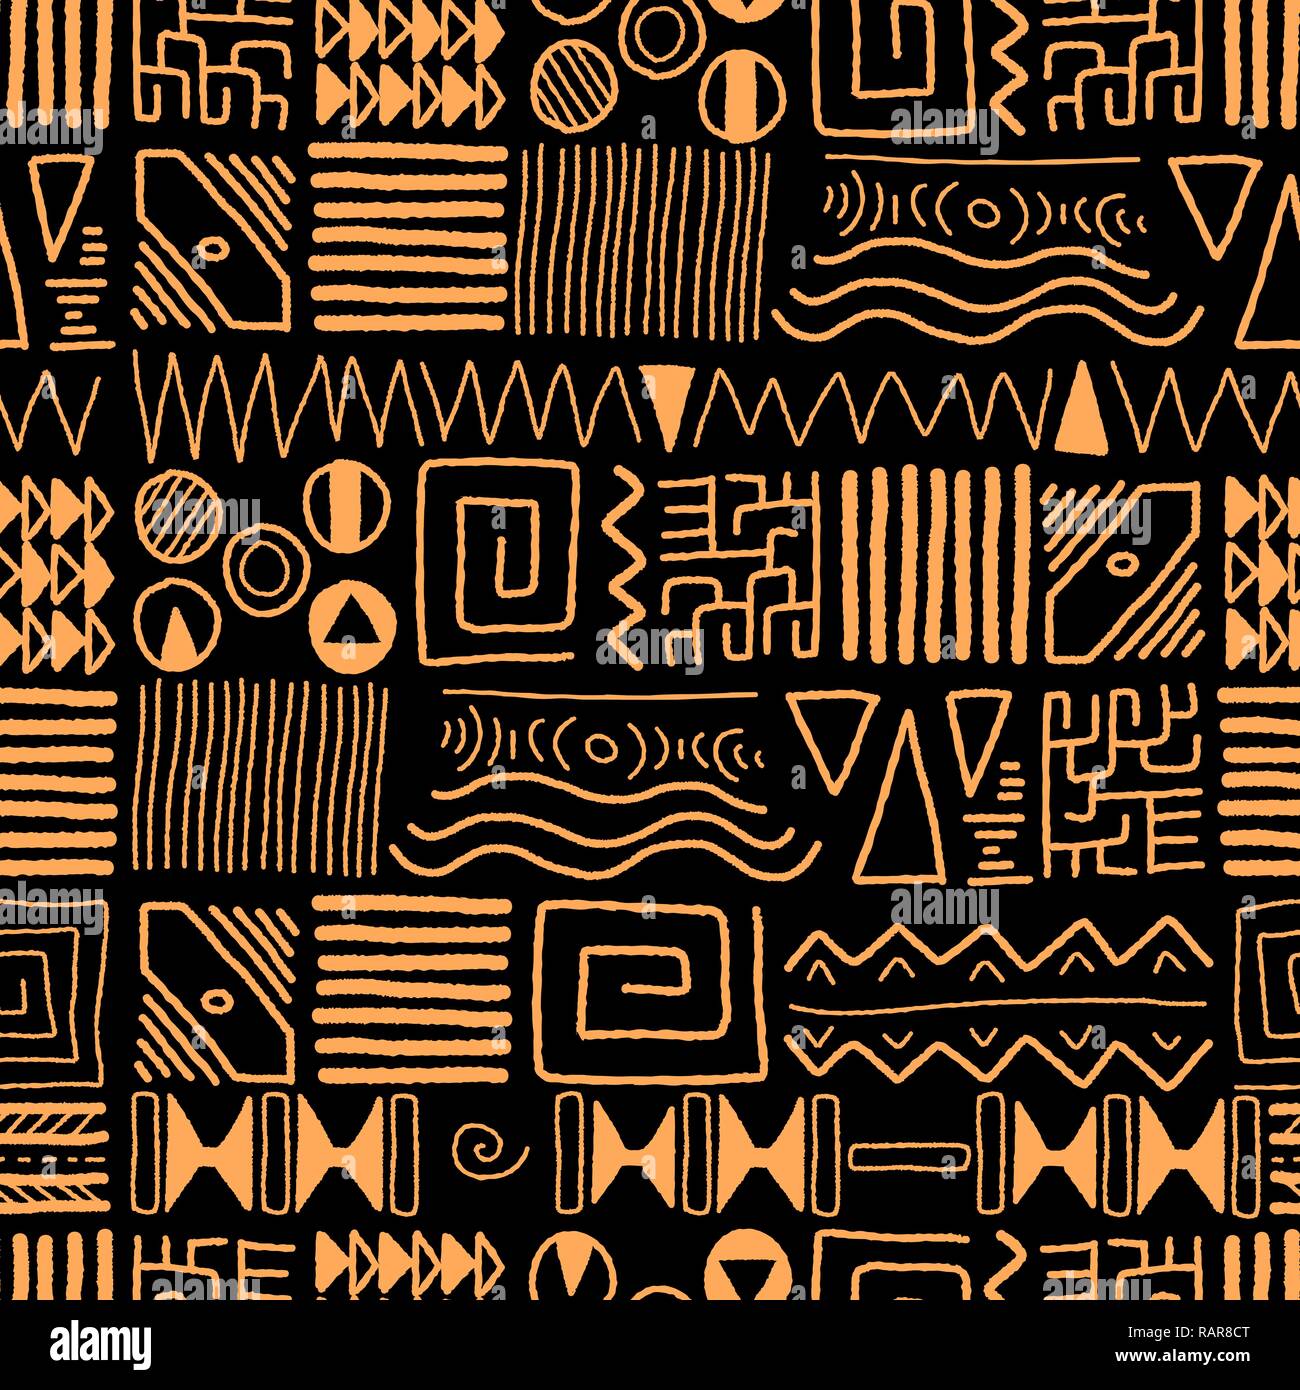 African ethnic pattern - tribal art background. Africa style design. Stock Vector